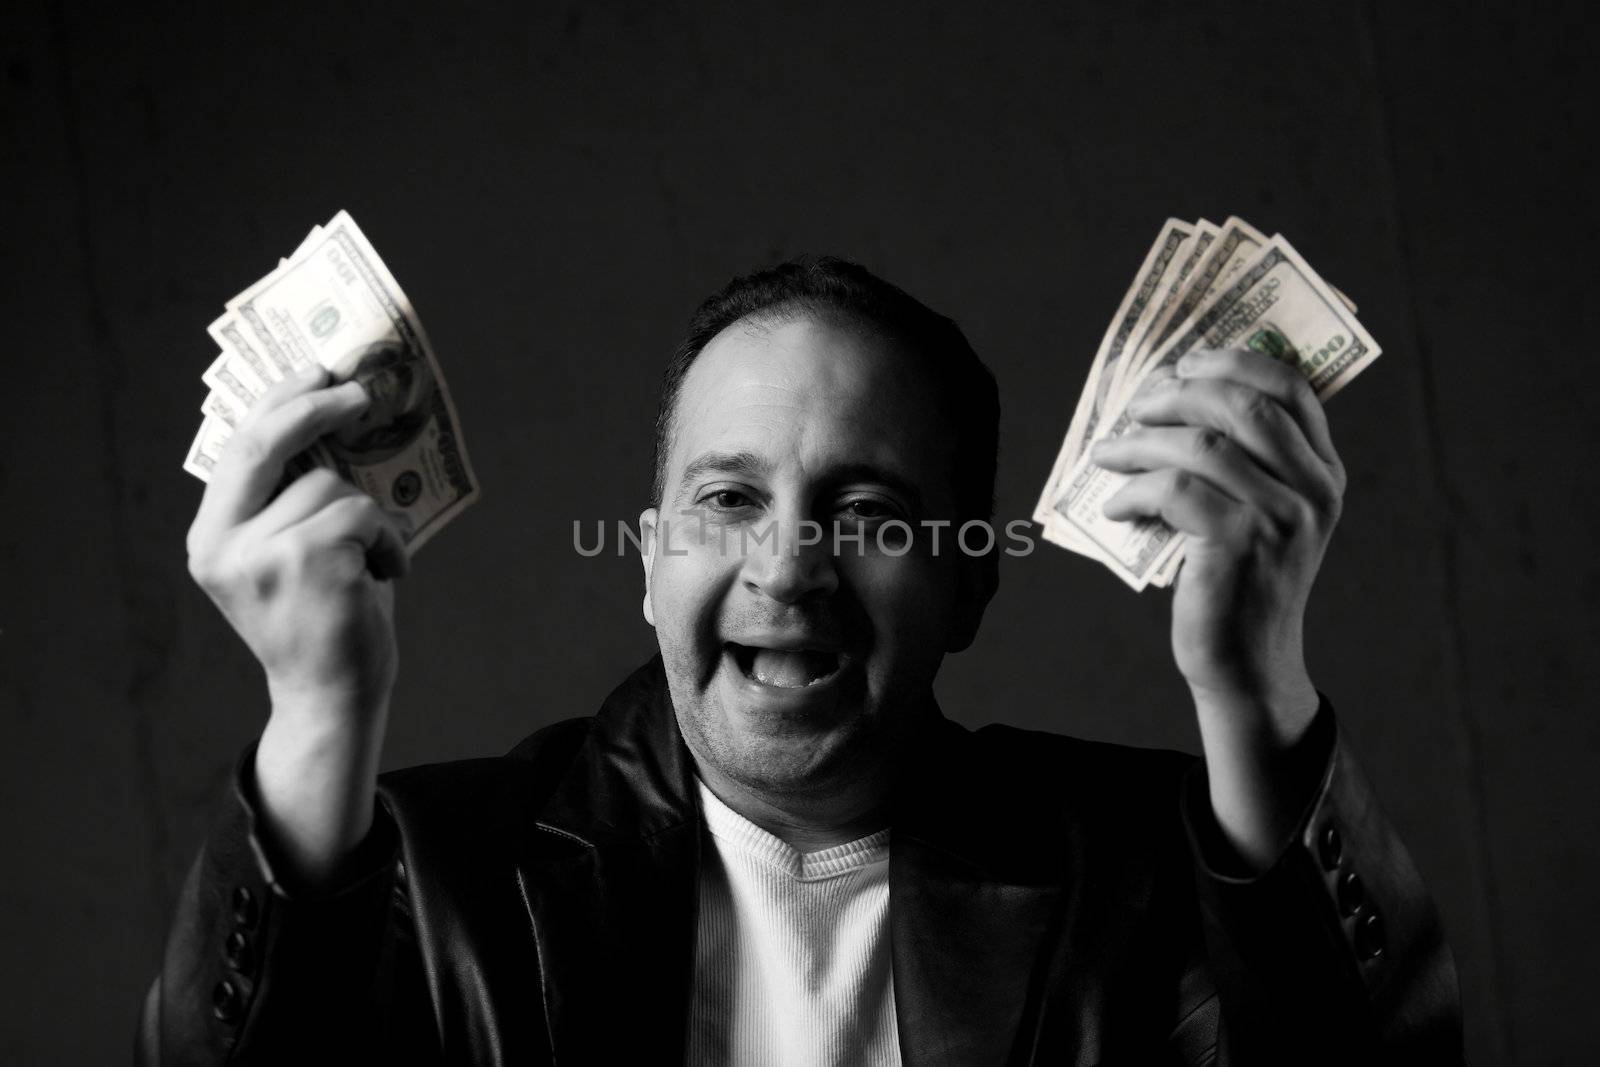 A man celebrating holding handfuls of green American cash with selective color. Shallow depth of field with focus on the face.